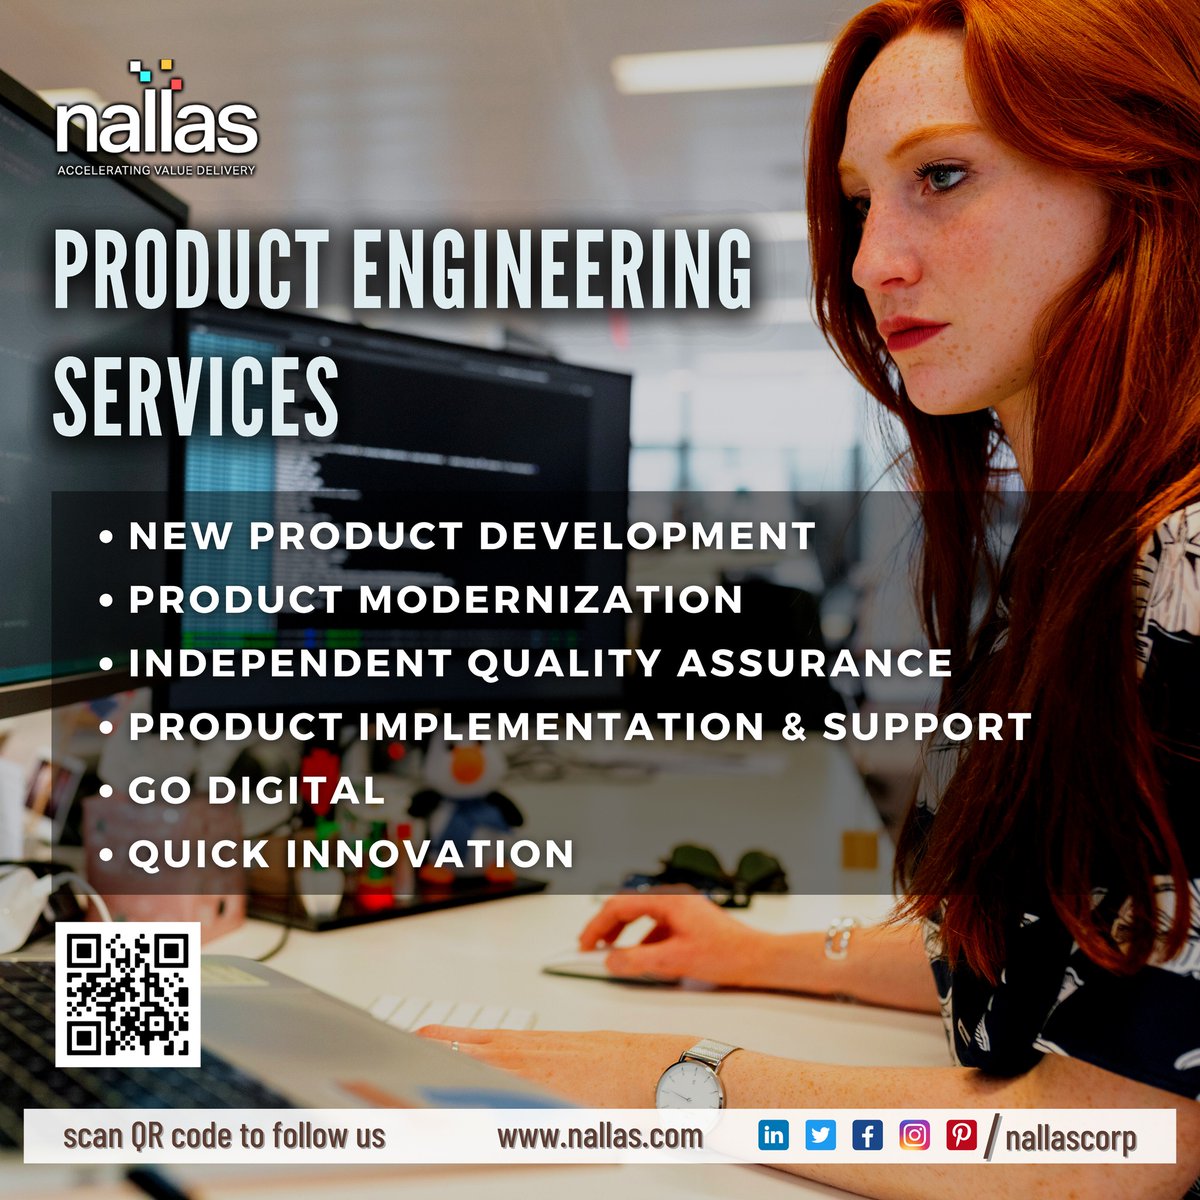 Build future-proof products with our innovative product engineering services.
Check out more here nallas.com/product-engine…
#productengineeringservices #productengineering #productmodernization #productmodernizationservices #newproductdevelopment #nallas